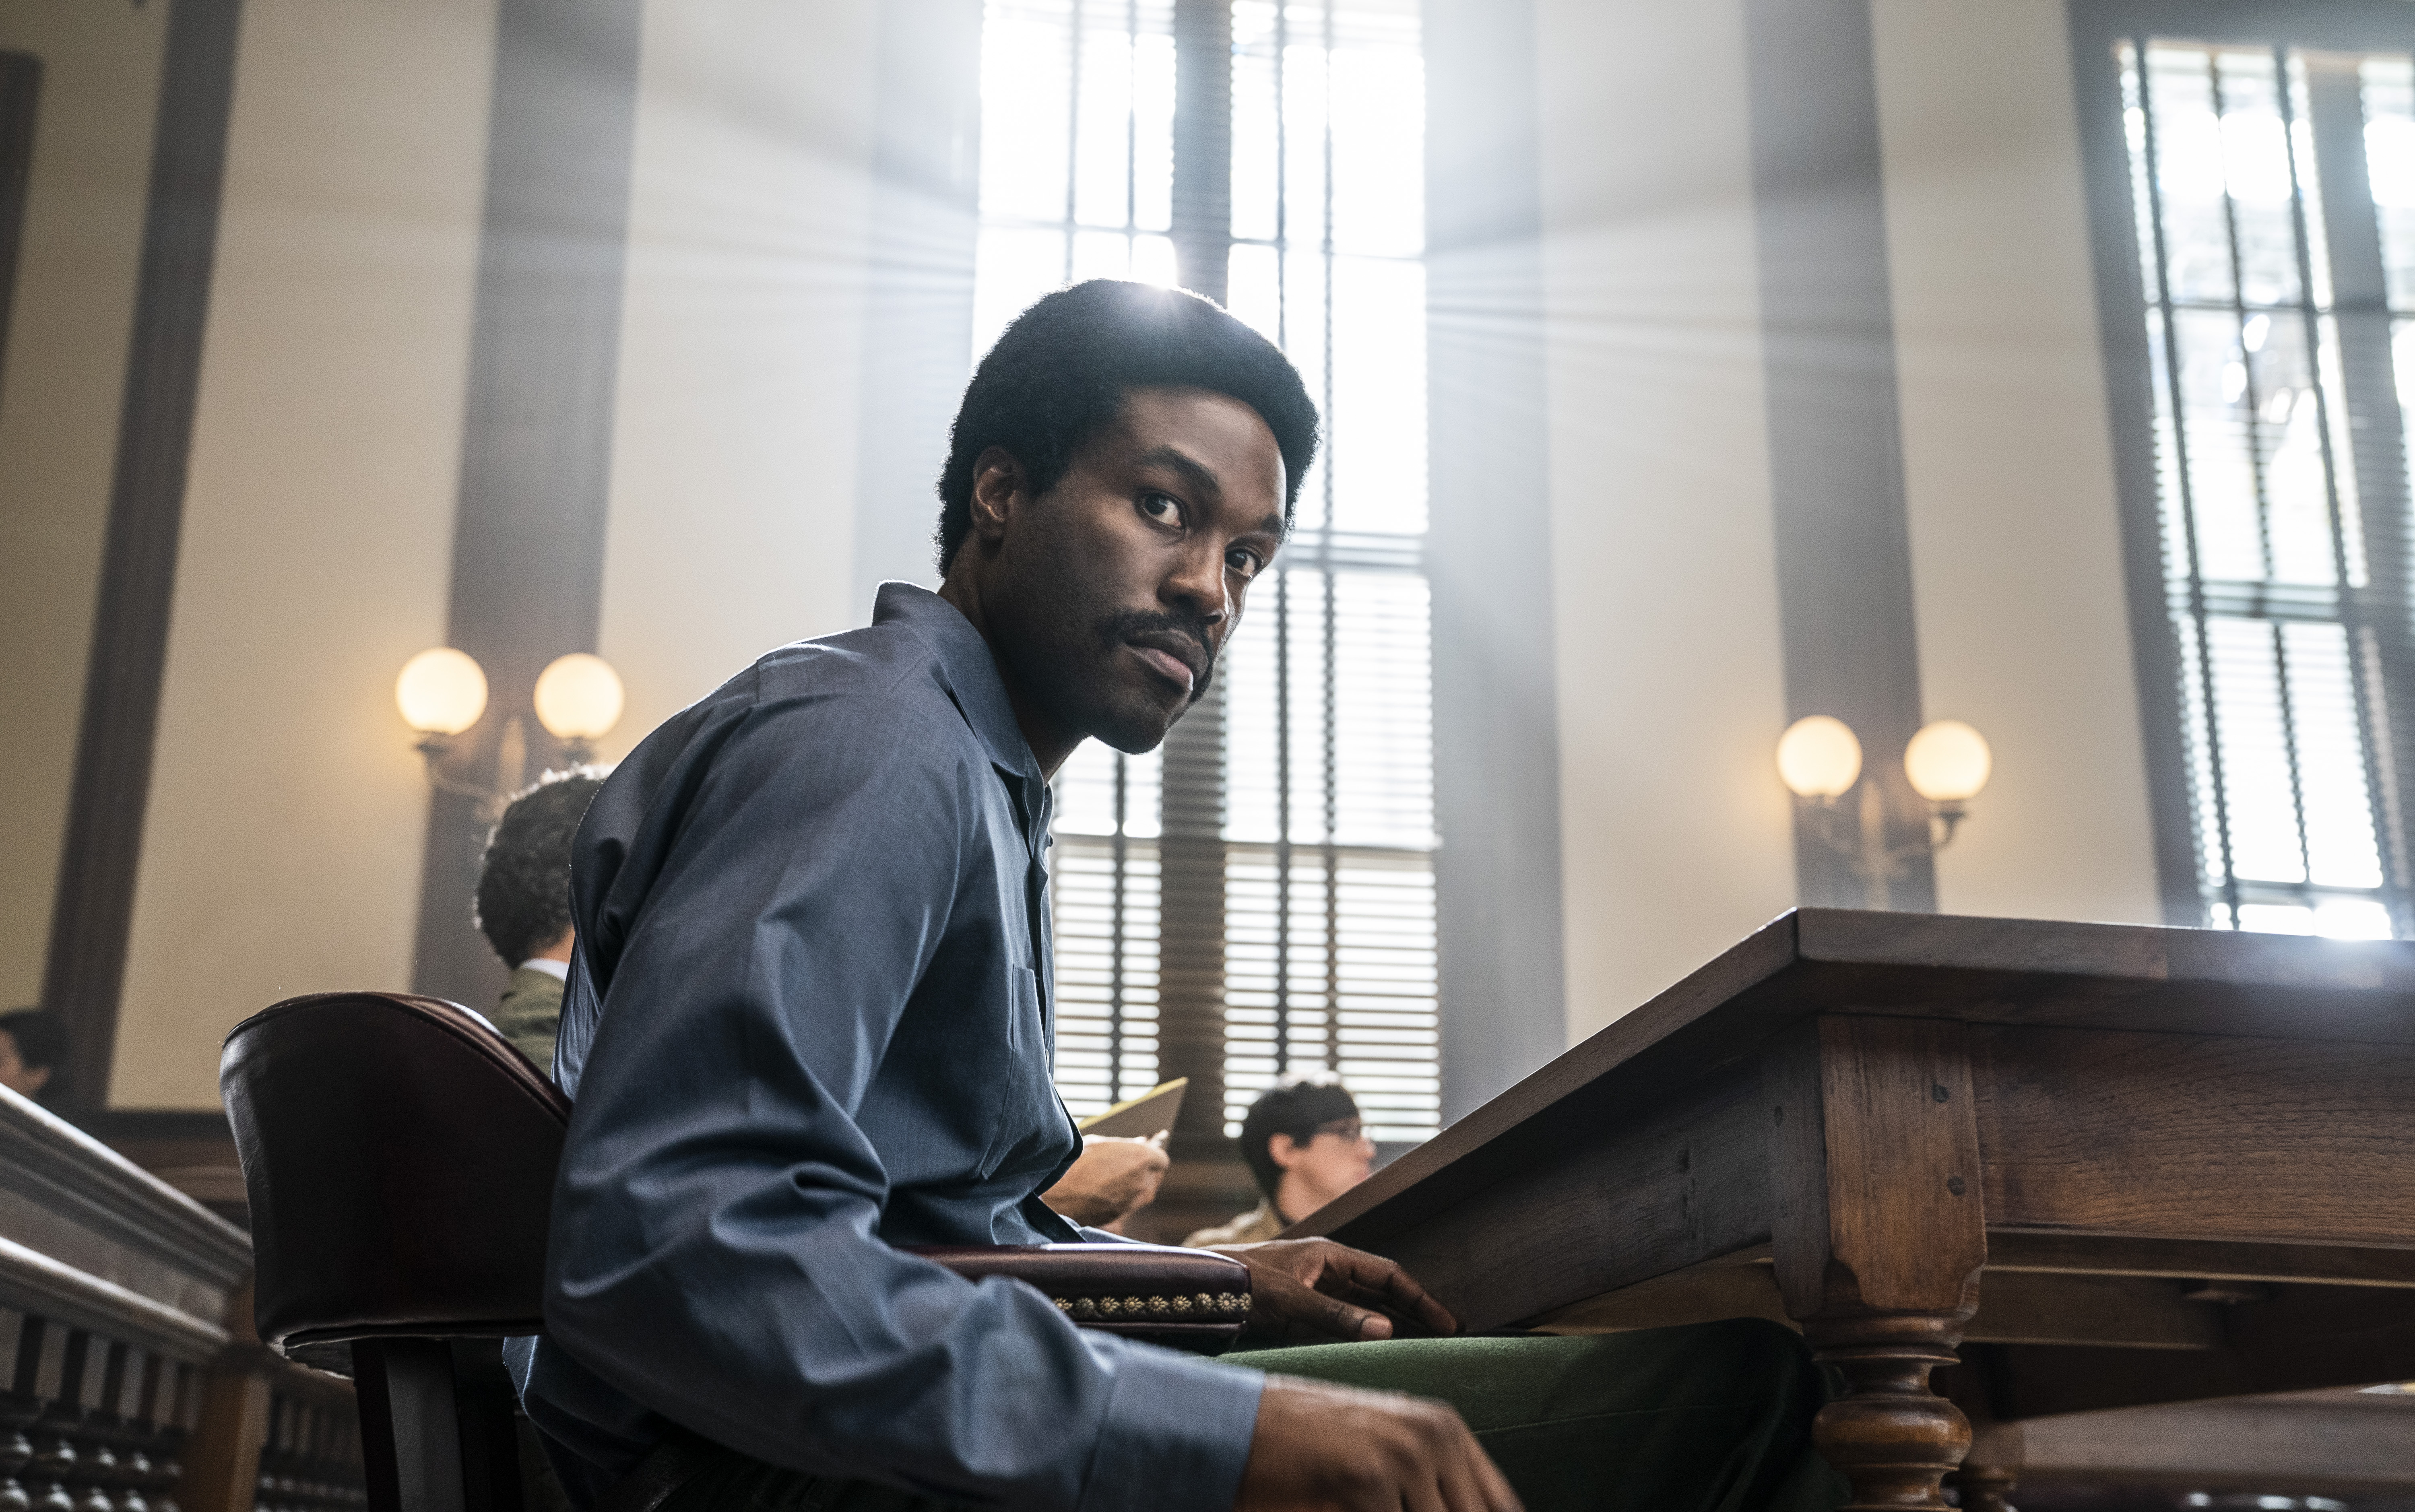 The Trial of the Chicago 7. Yahya Abdul-Mateen II as Bobby Seale in The Trial of the Chicago 7. Cr. Niko Tavernise/NETFLIX © 2020